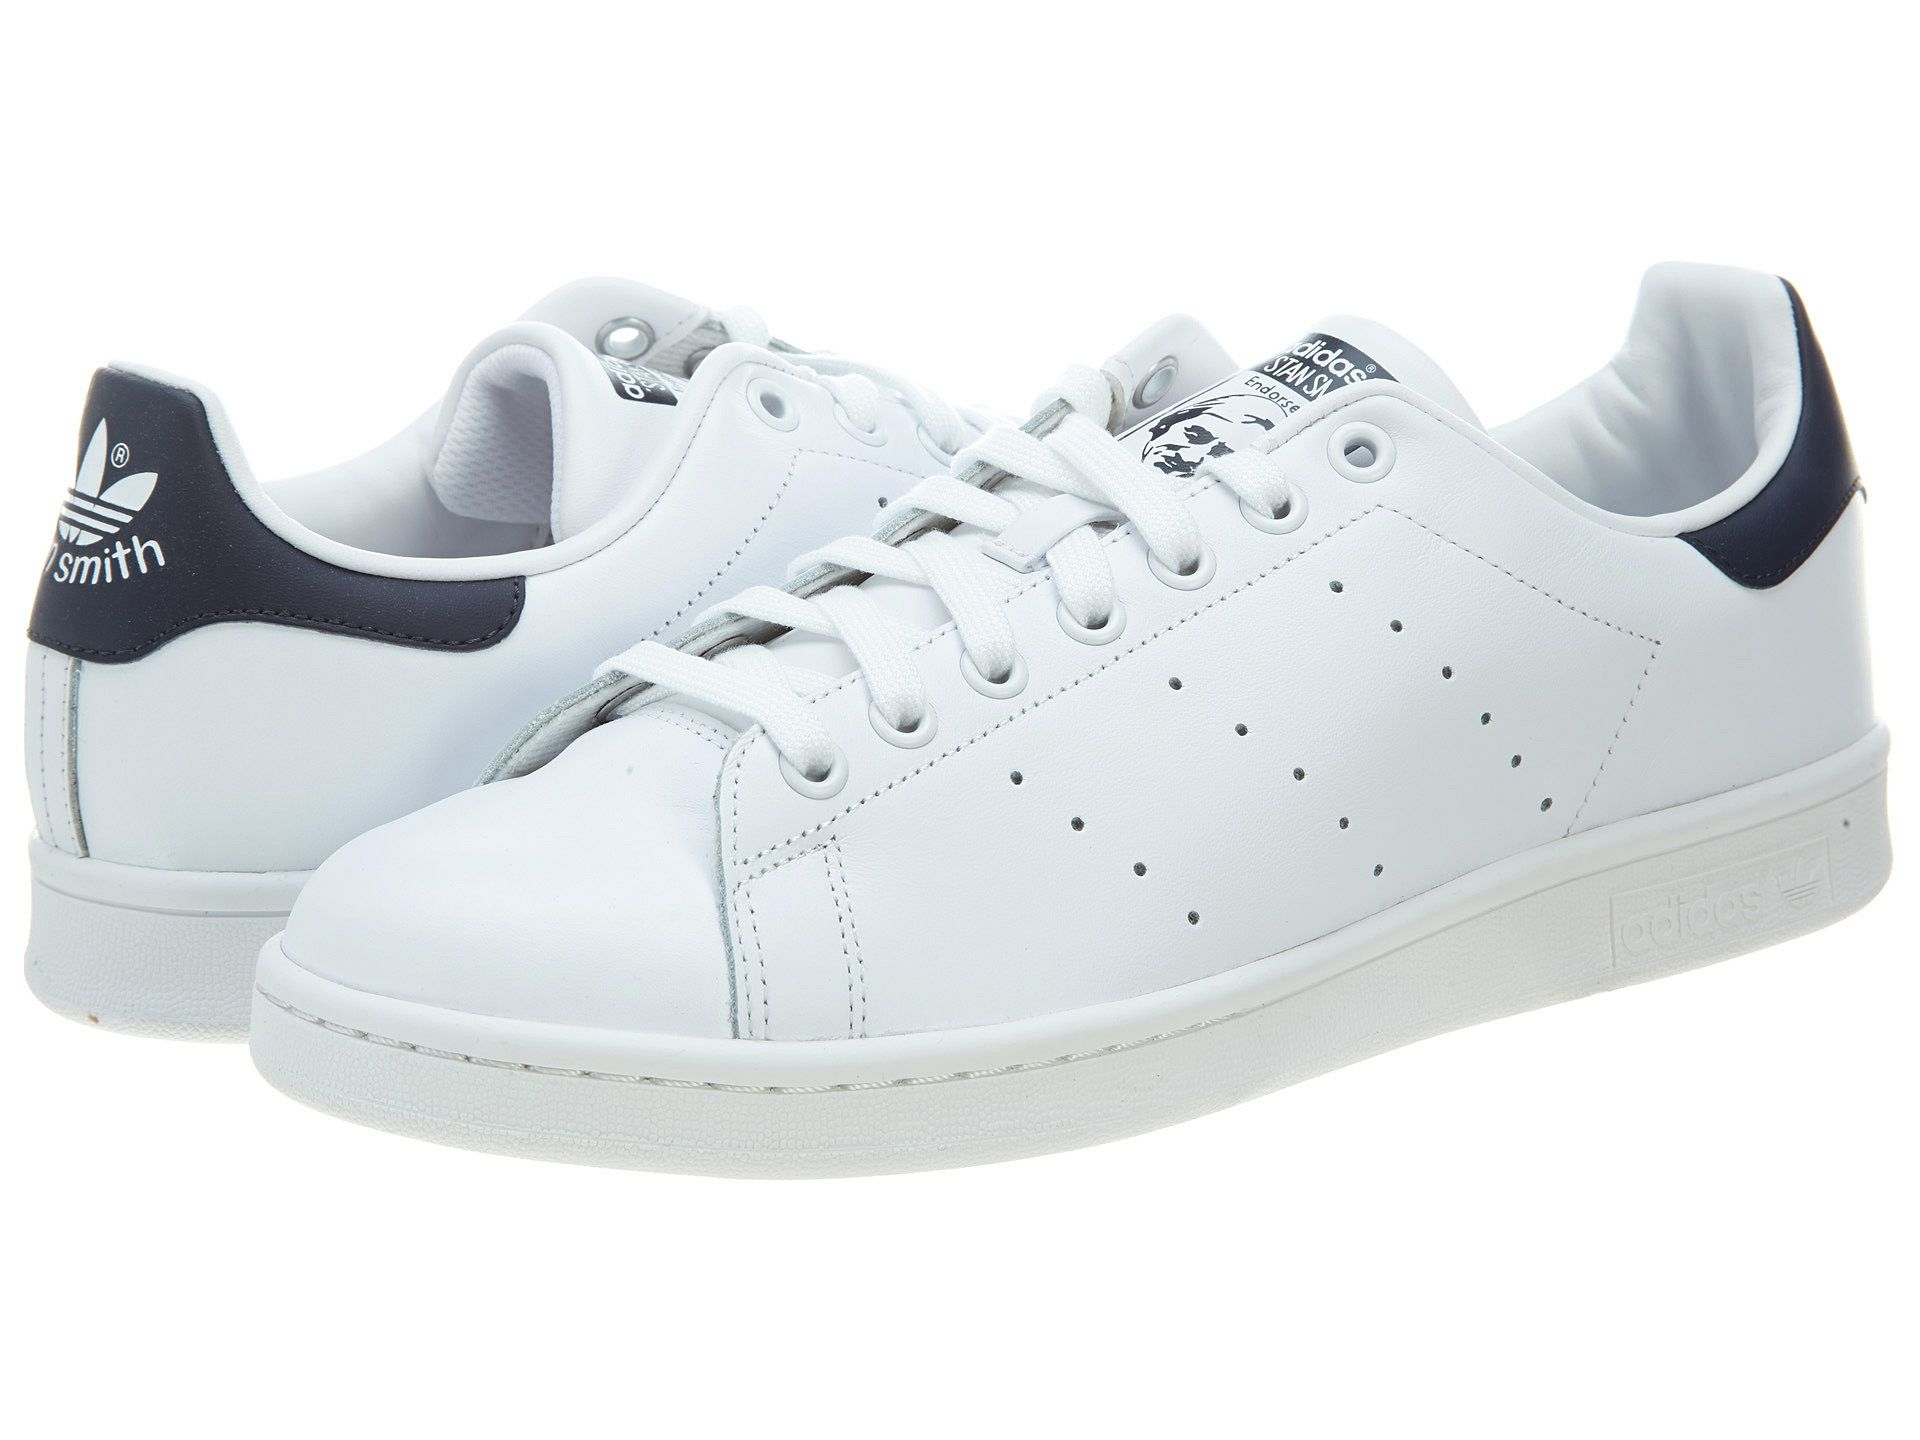 adidas originals stan smith leather trainers m20325